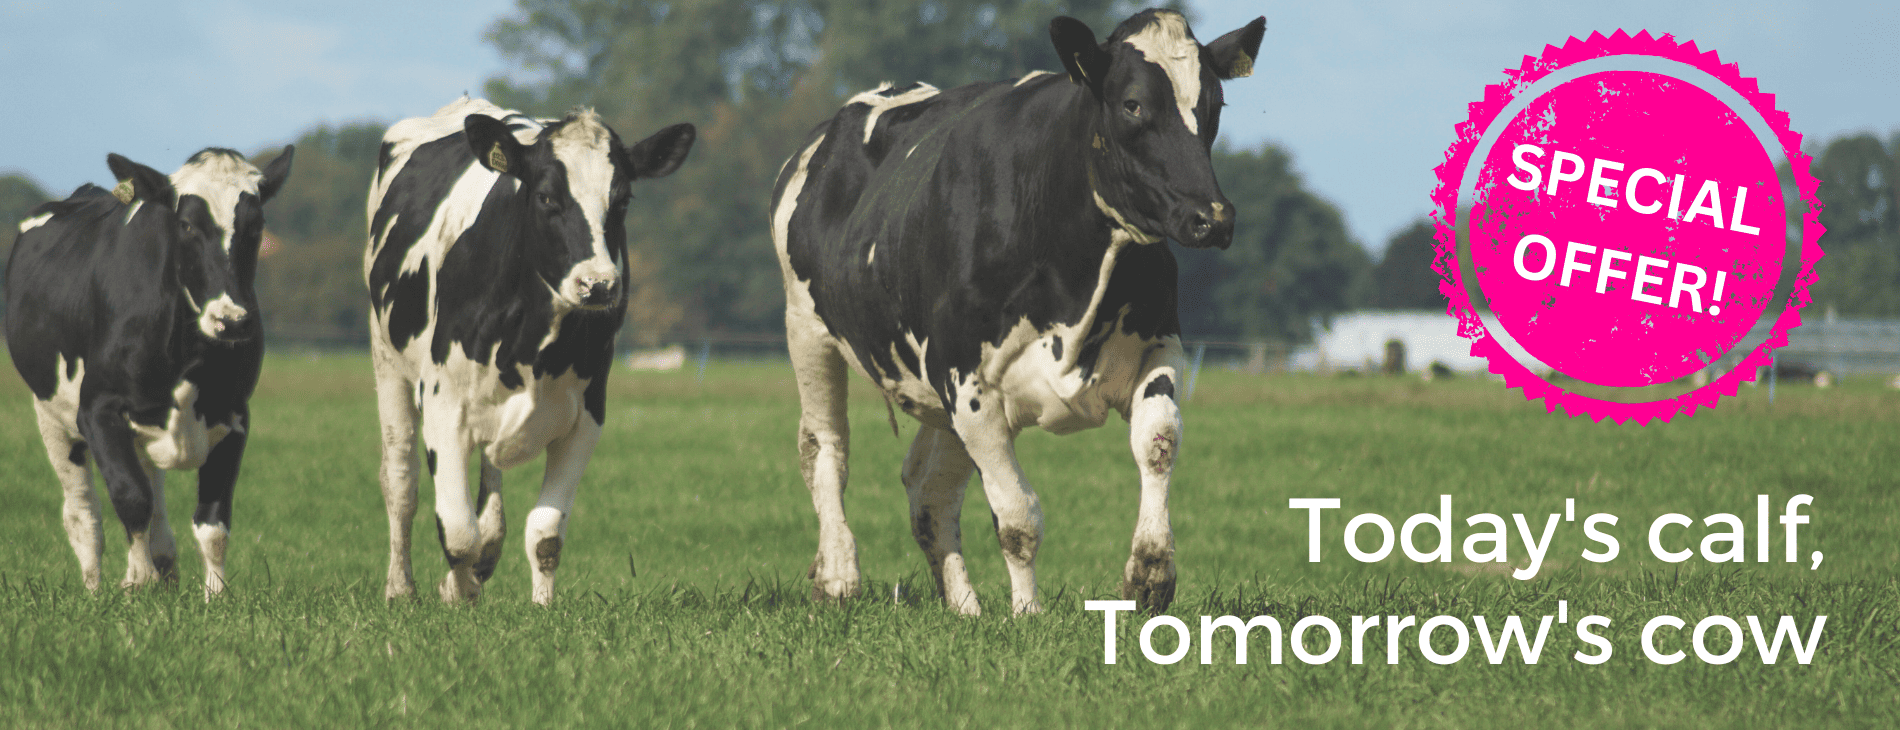 SPECIAL OFFER Todays Calf Tomorrows Cow (1)